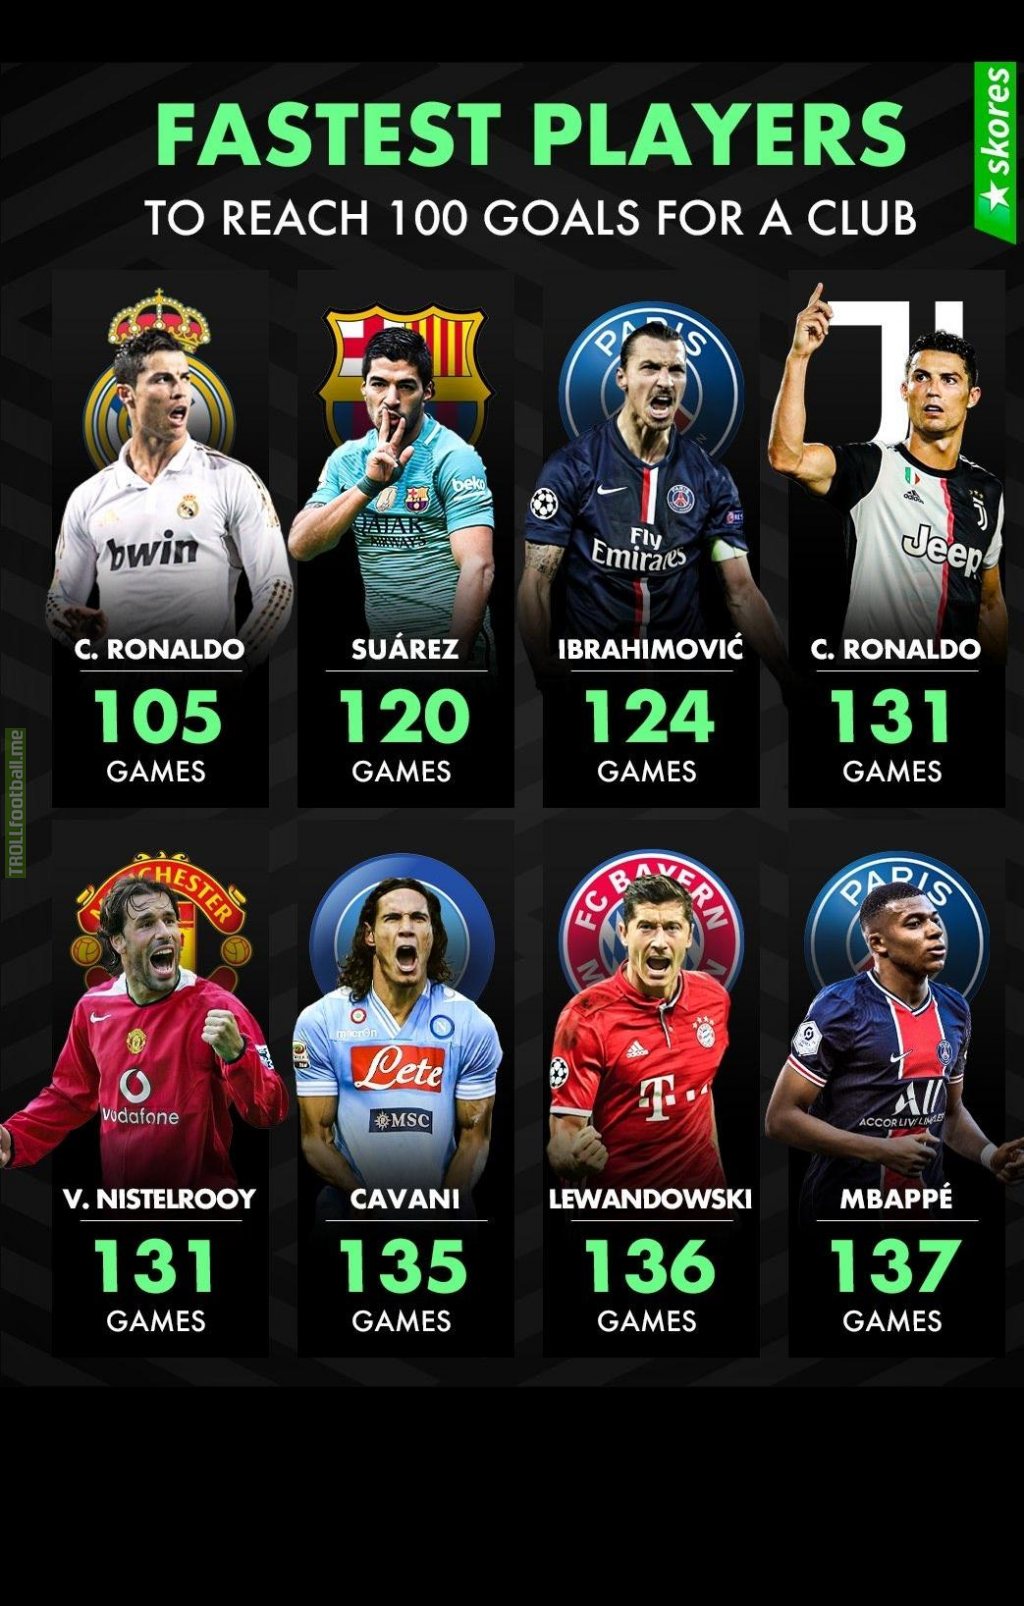 Fastest players to reach 100 goals for a club.